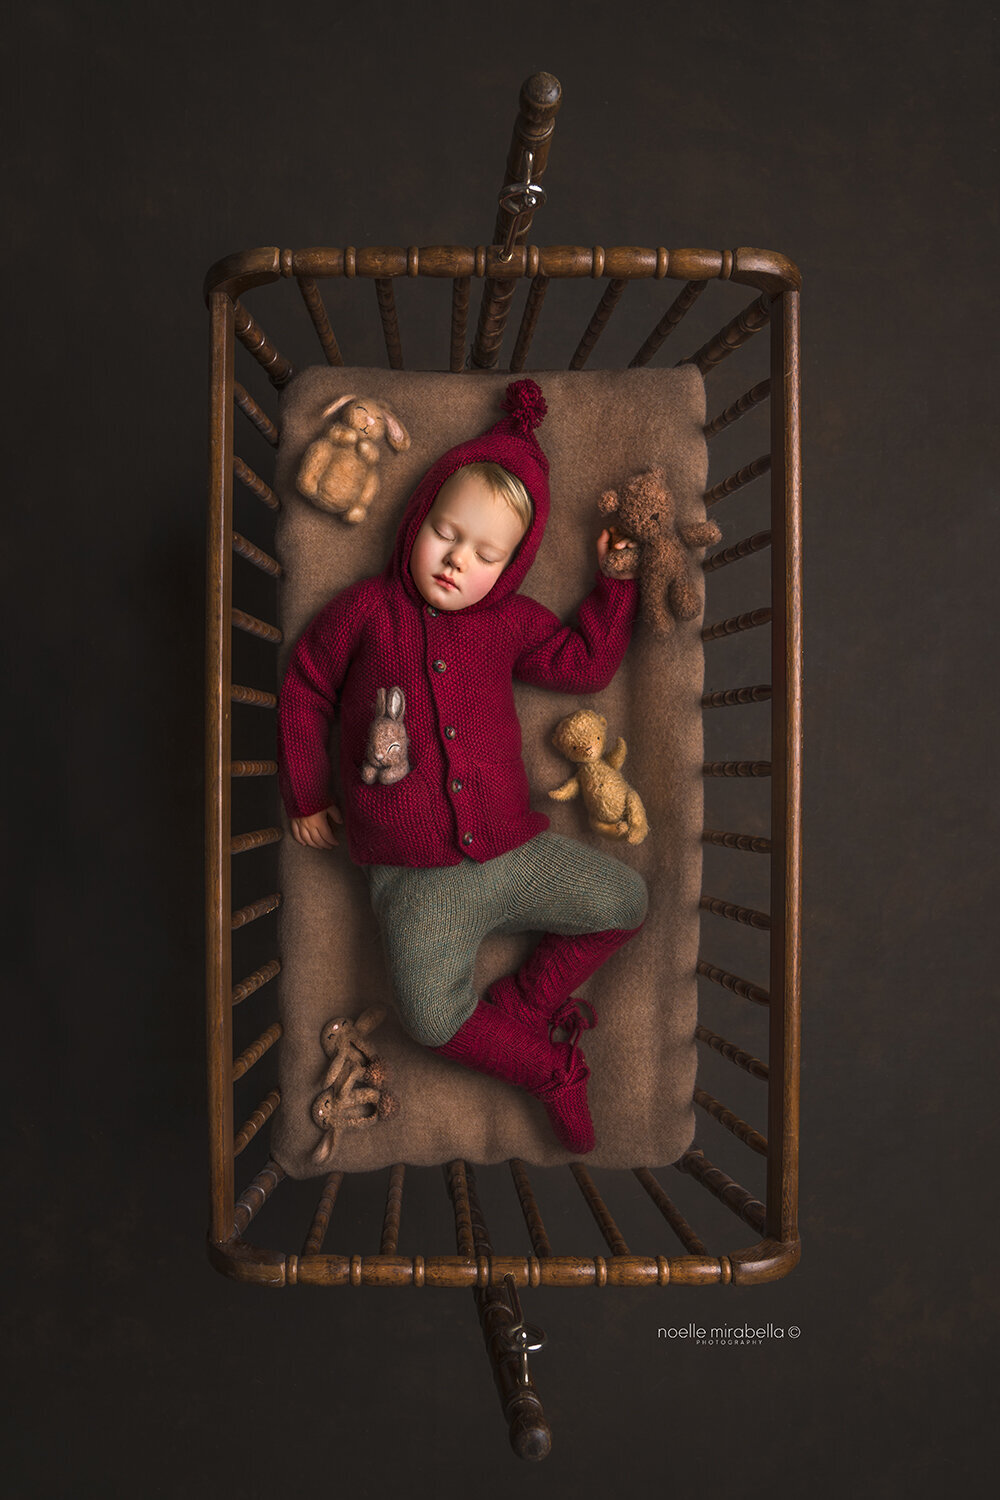 Baby wearing red and green hand knits sleeping in a Jenny Lind cradle.